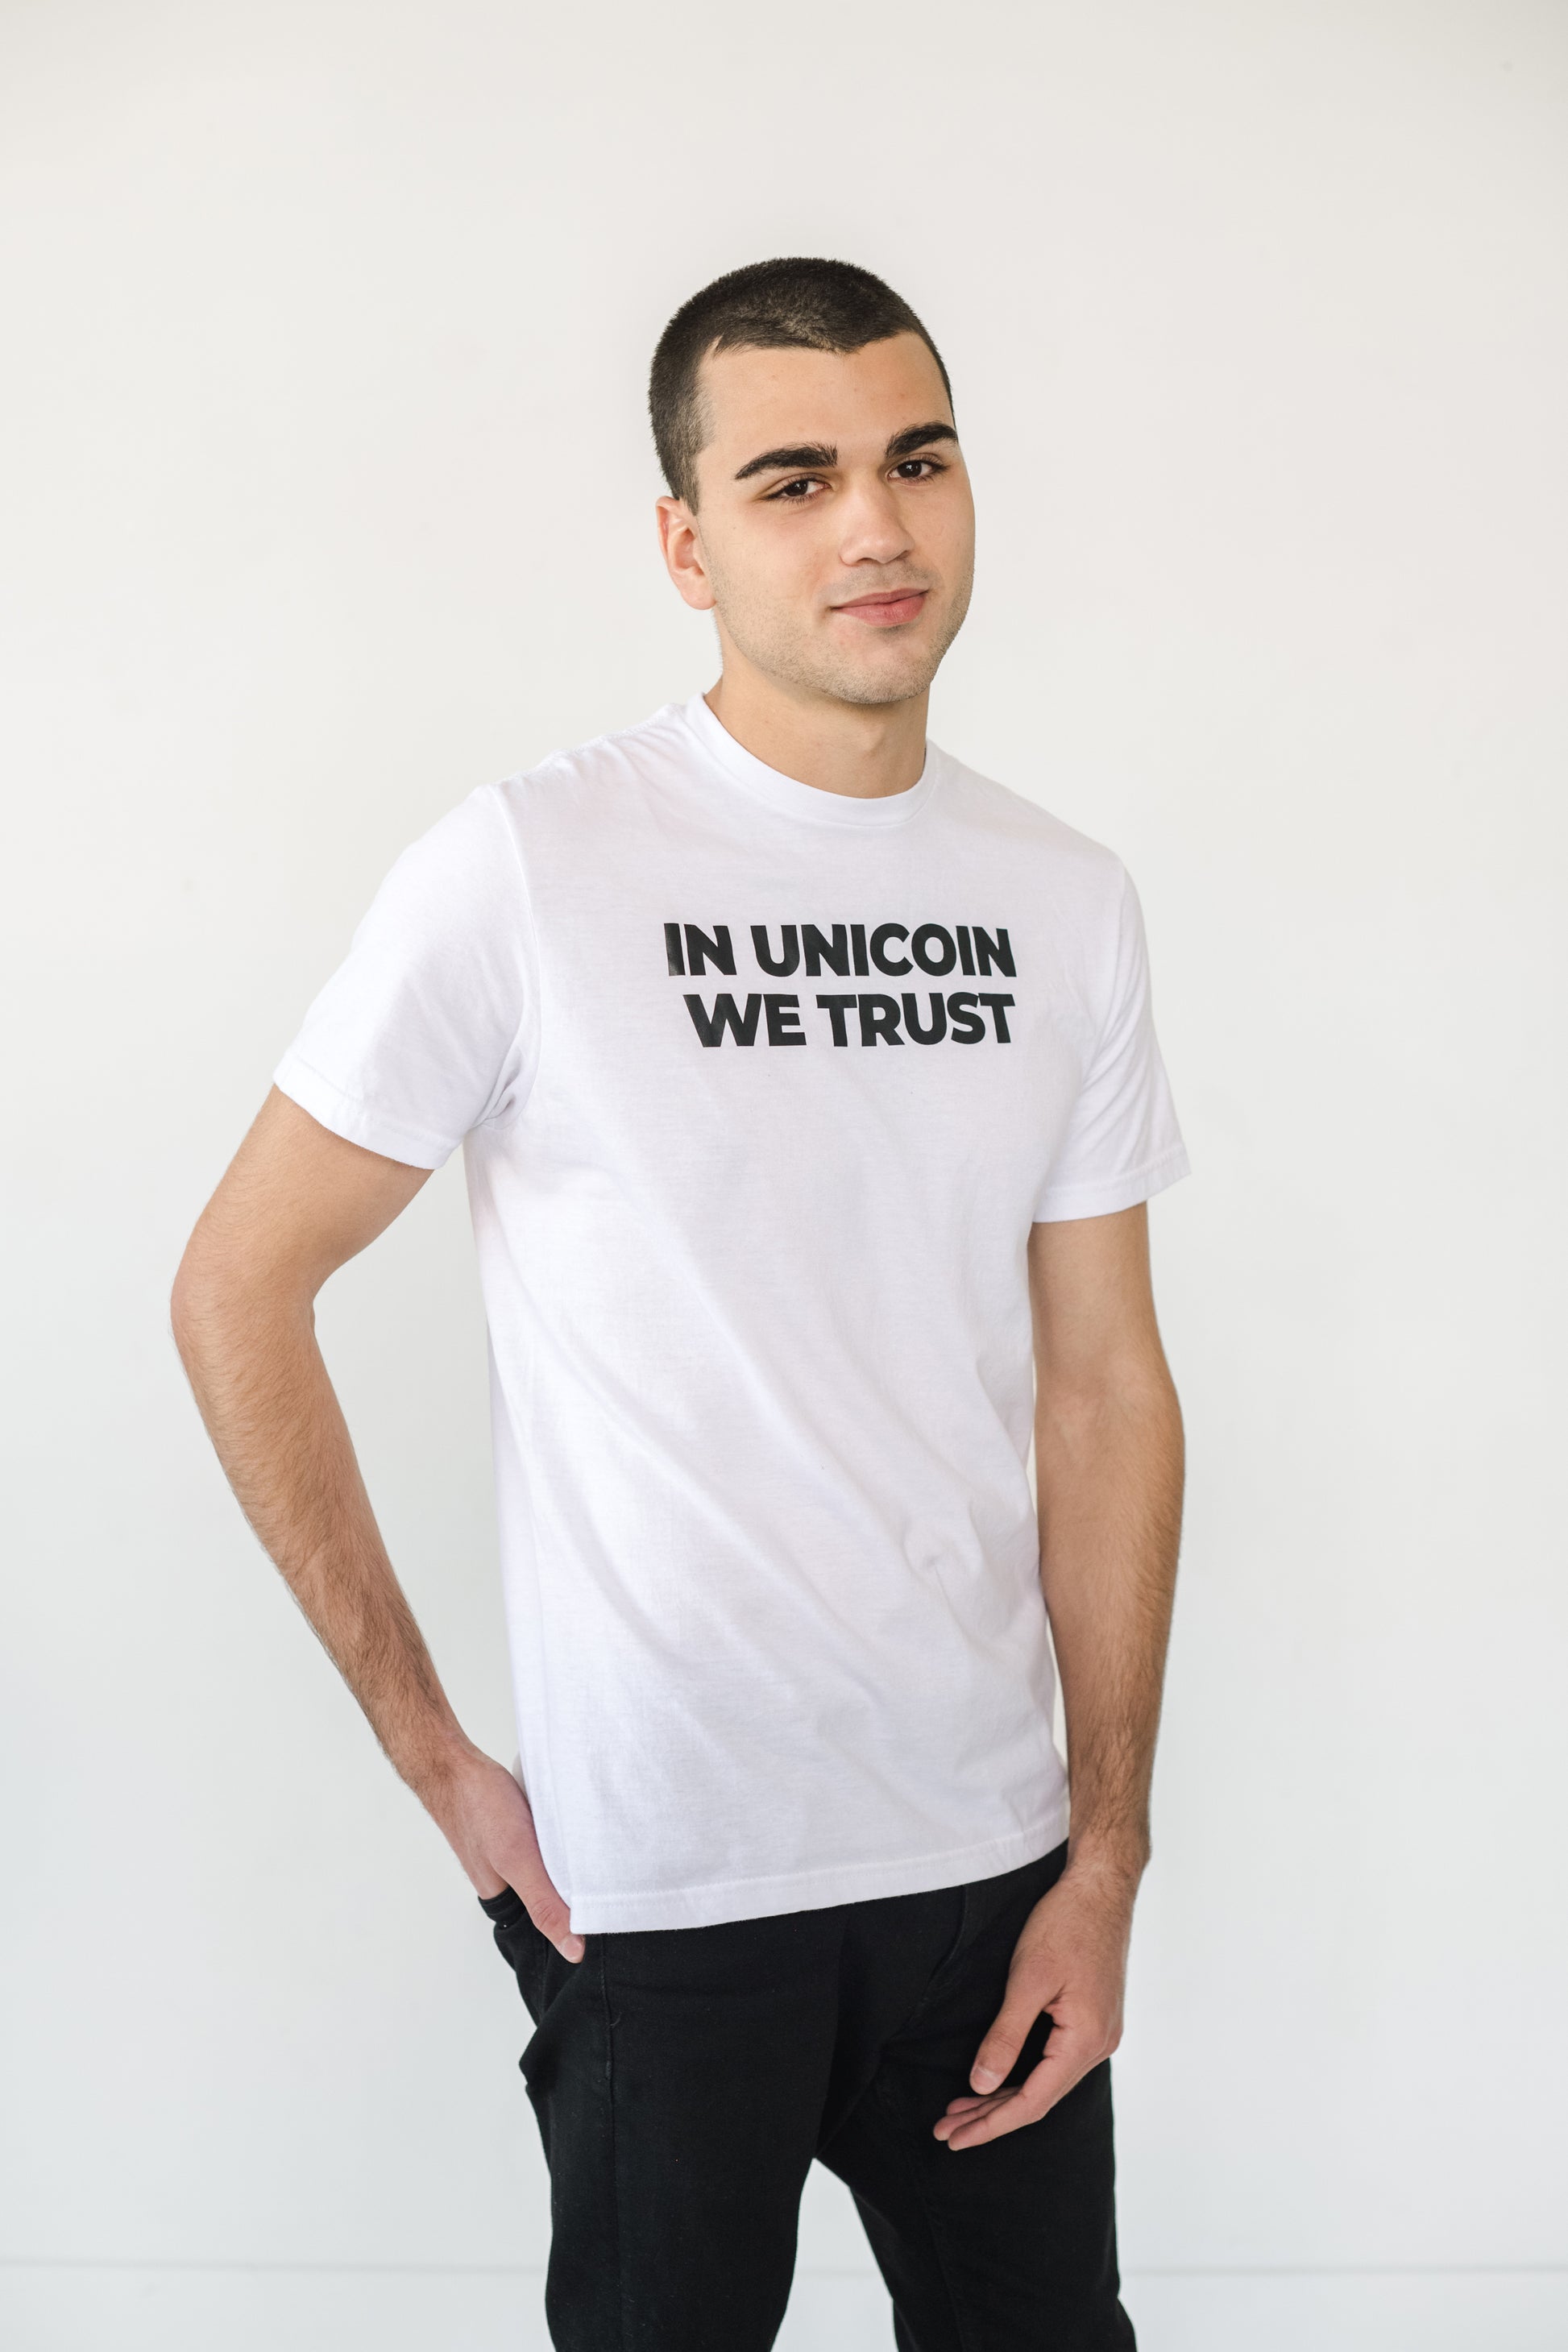 In Unicoin we trust, Tshirt for crypto users,  Tshirt for crypto users, Upgrade your wardrobe with our luxurious premium organic cotton tees, crafted for unbeatable comfort and timeless elegance. Made from 100% organic cotton, these short-sleeve tees are machine washable for easy care. Enjoy a soft touch and elevate your everyday style effortlessly.